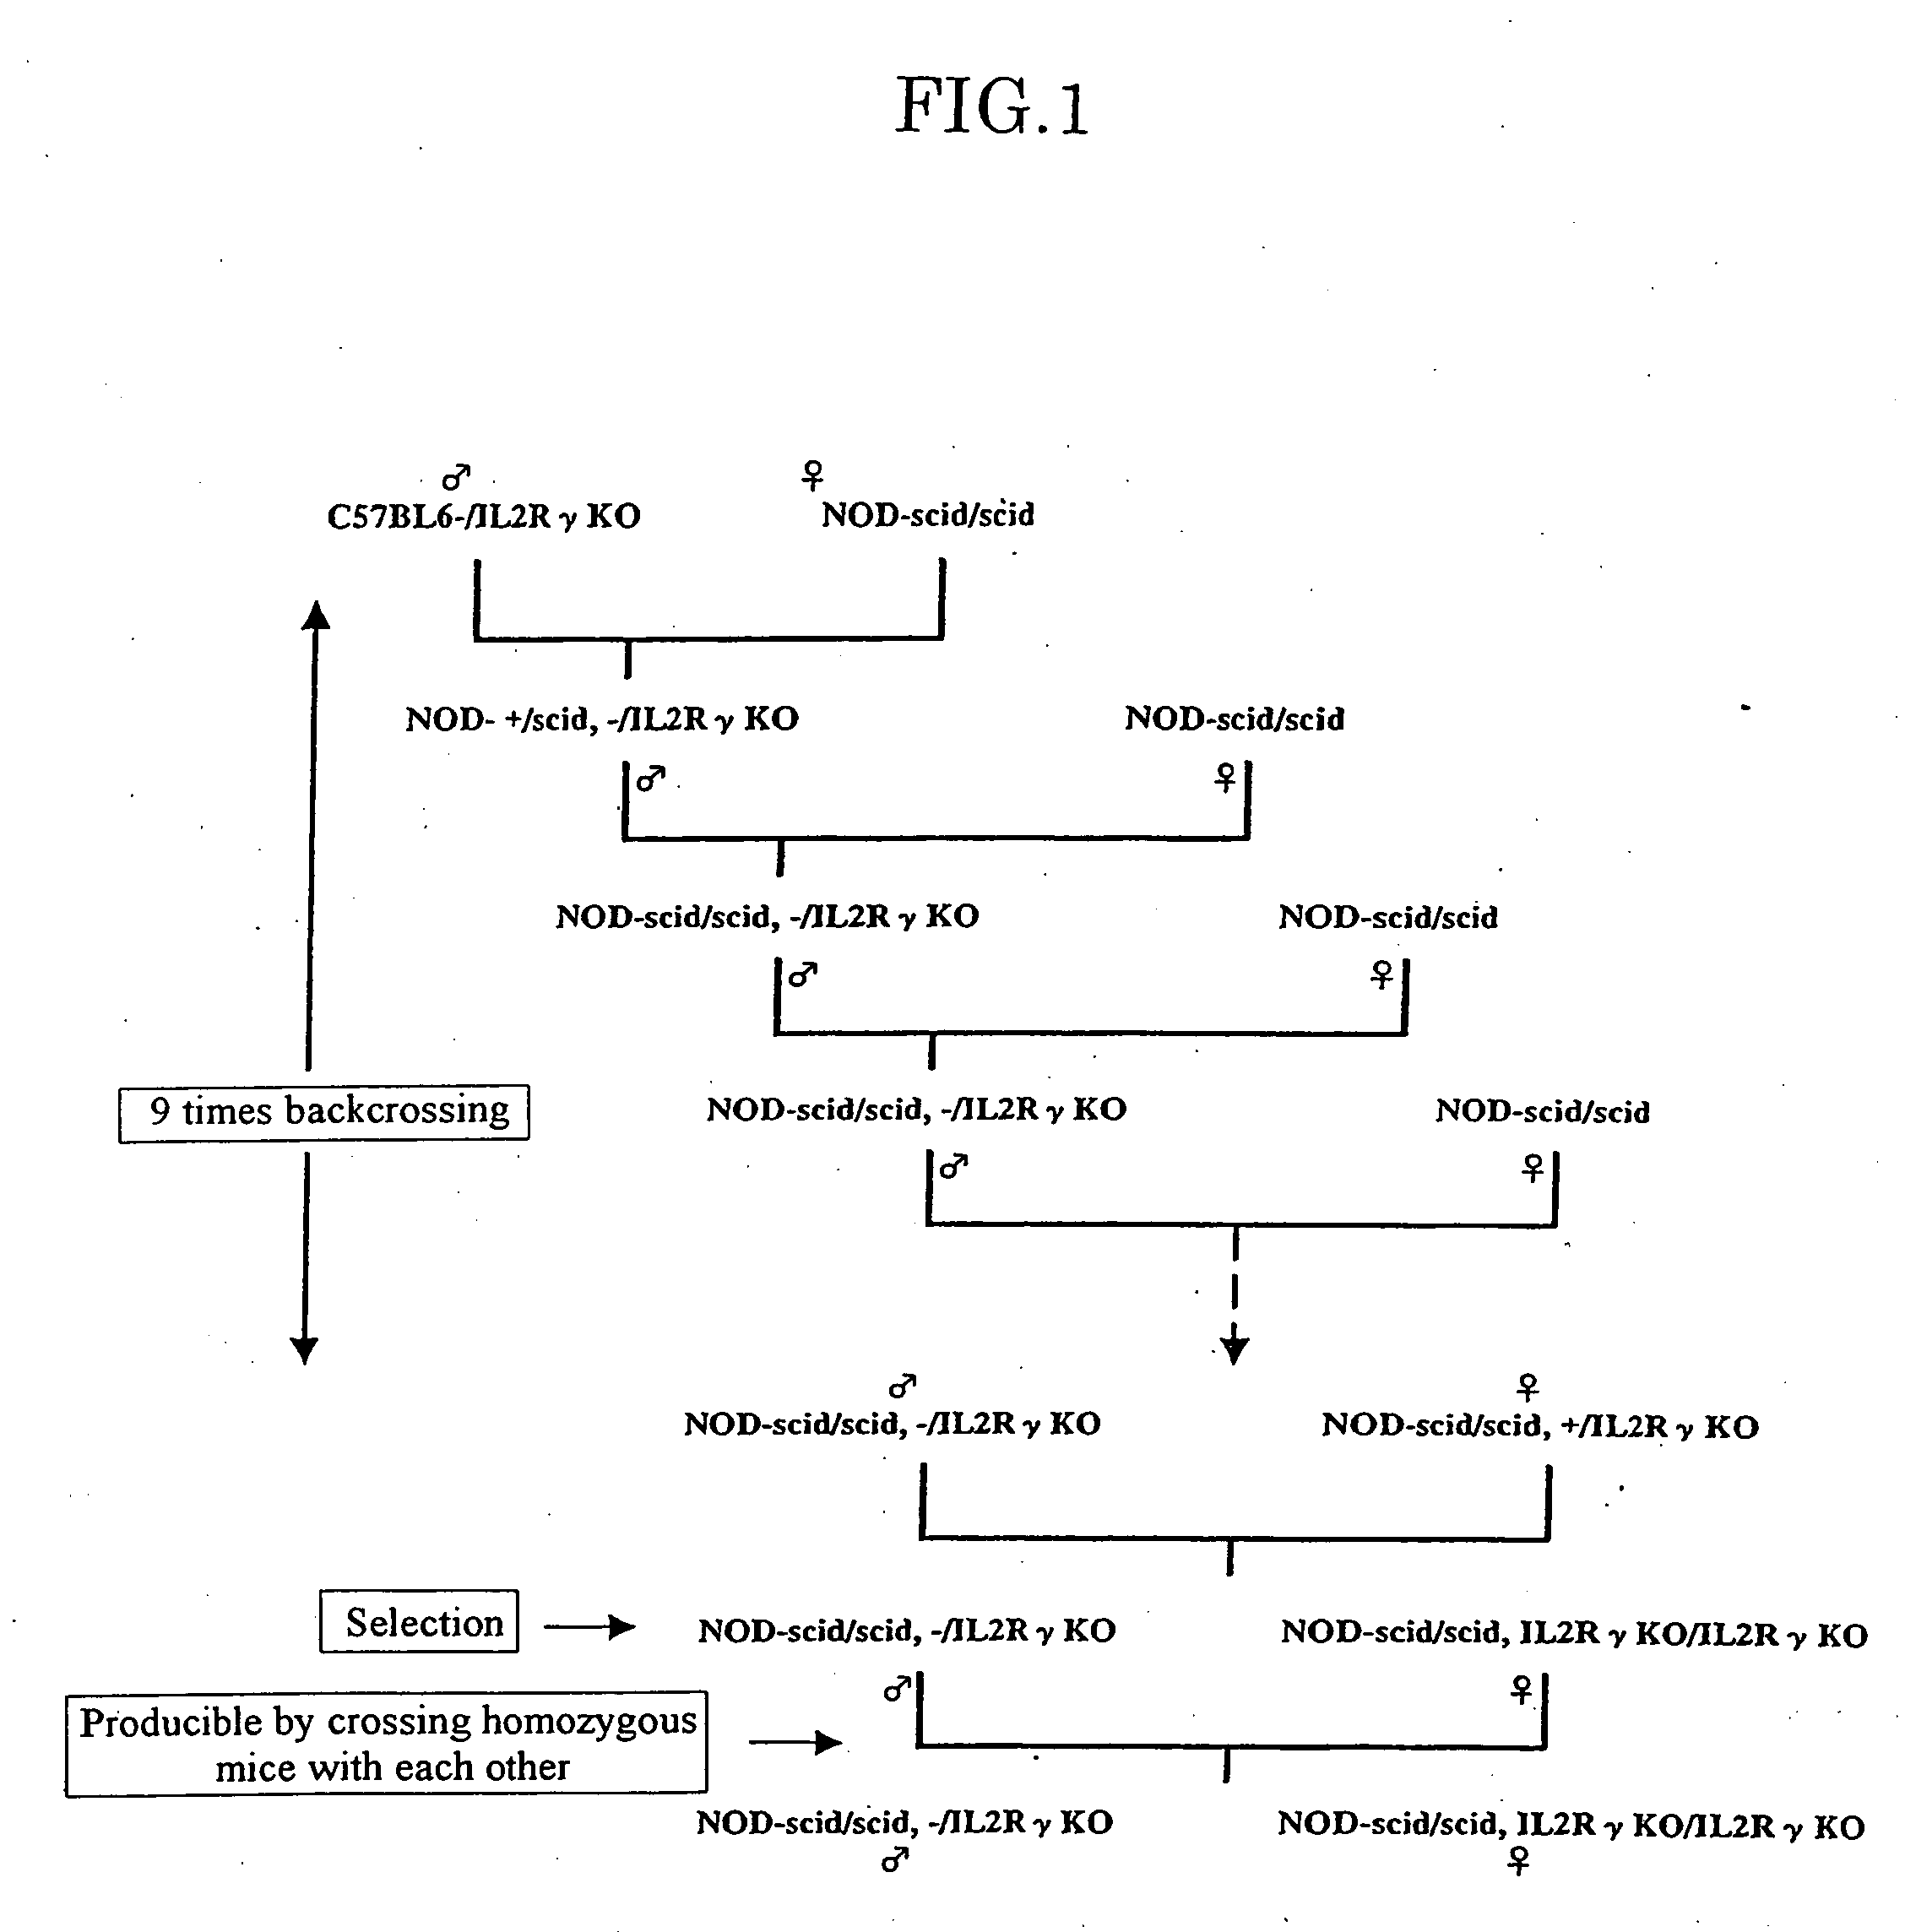 Method of producing a mouse suitable for engraftment, differentiation and proliferation of heterologous cells, mouse produced by this method and use of the mouse